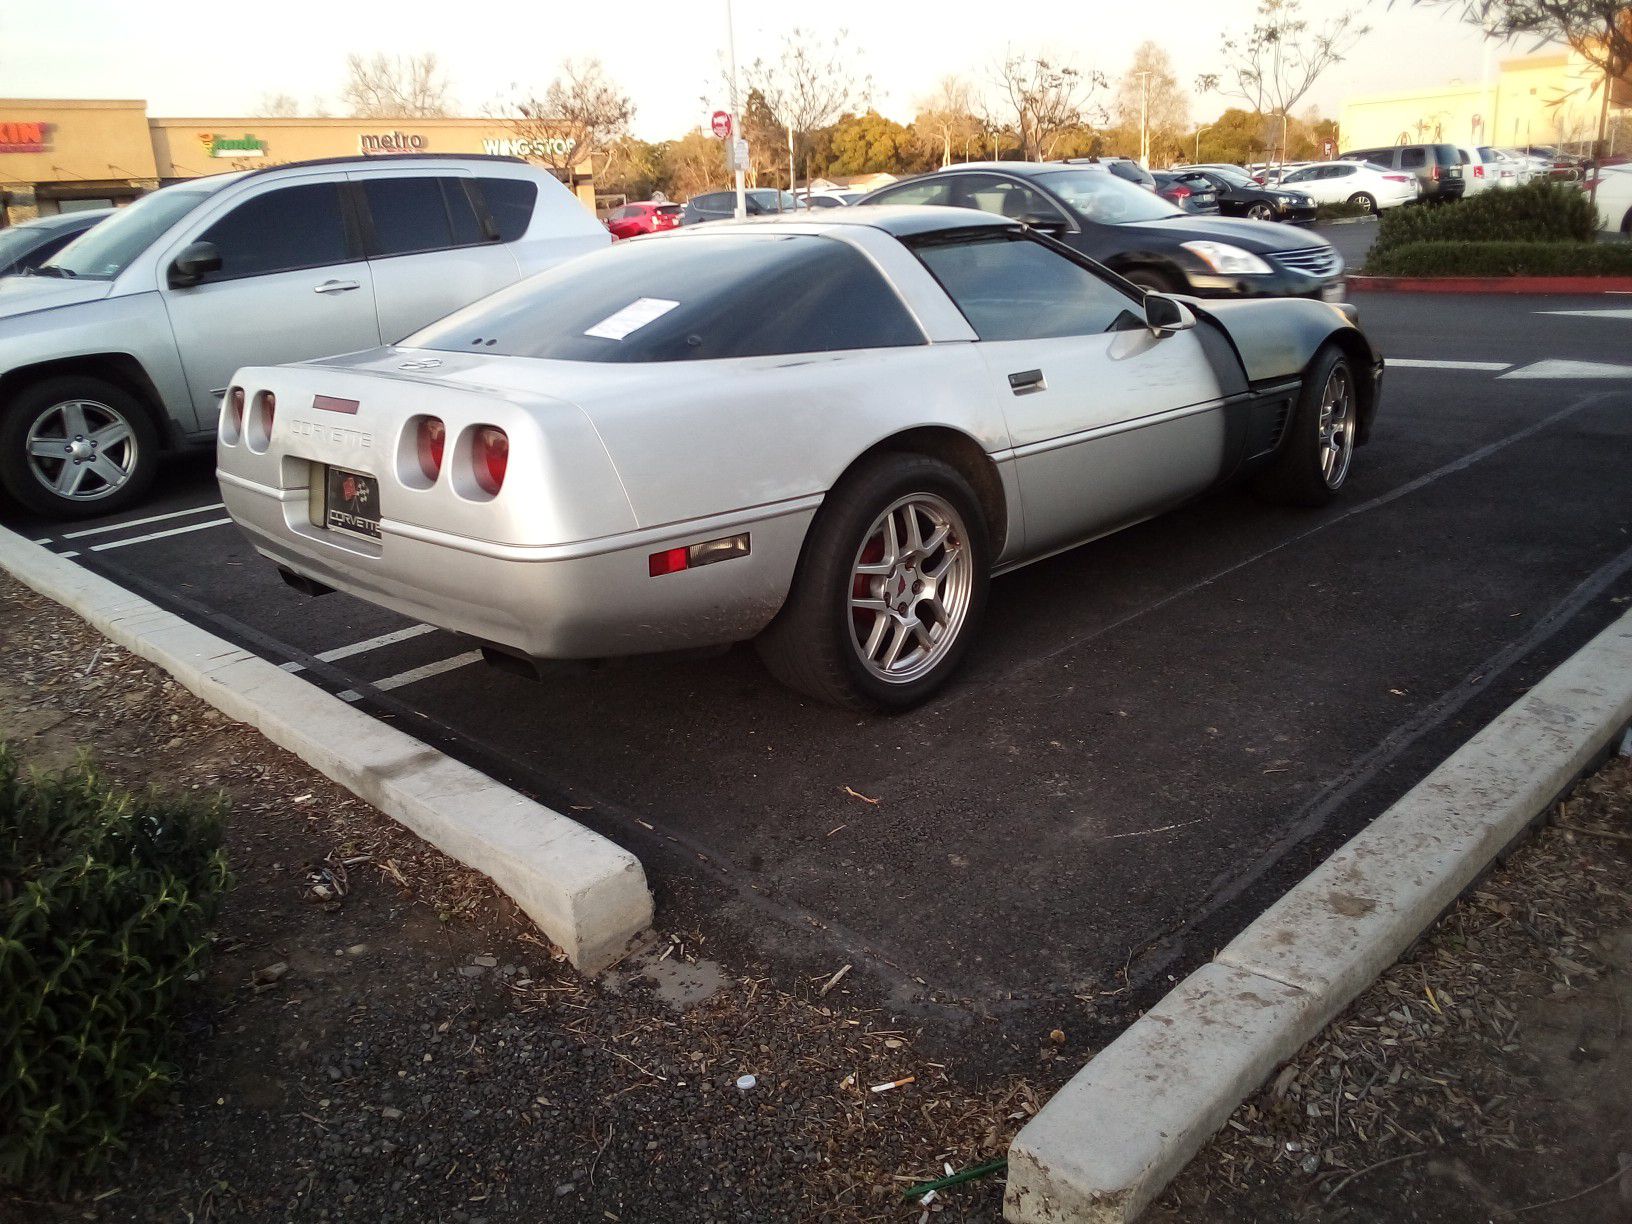 1996 Corvette, Chevy. Only 88,000 miles on it. Very fast and reliable car ,no oil leak s motor is great. $3500 or best offre